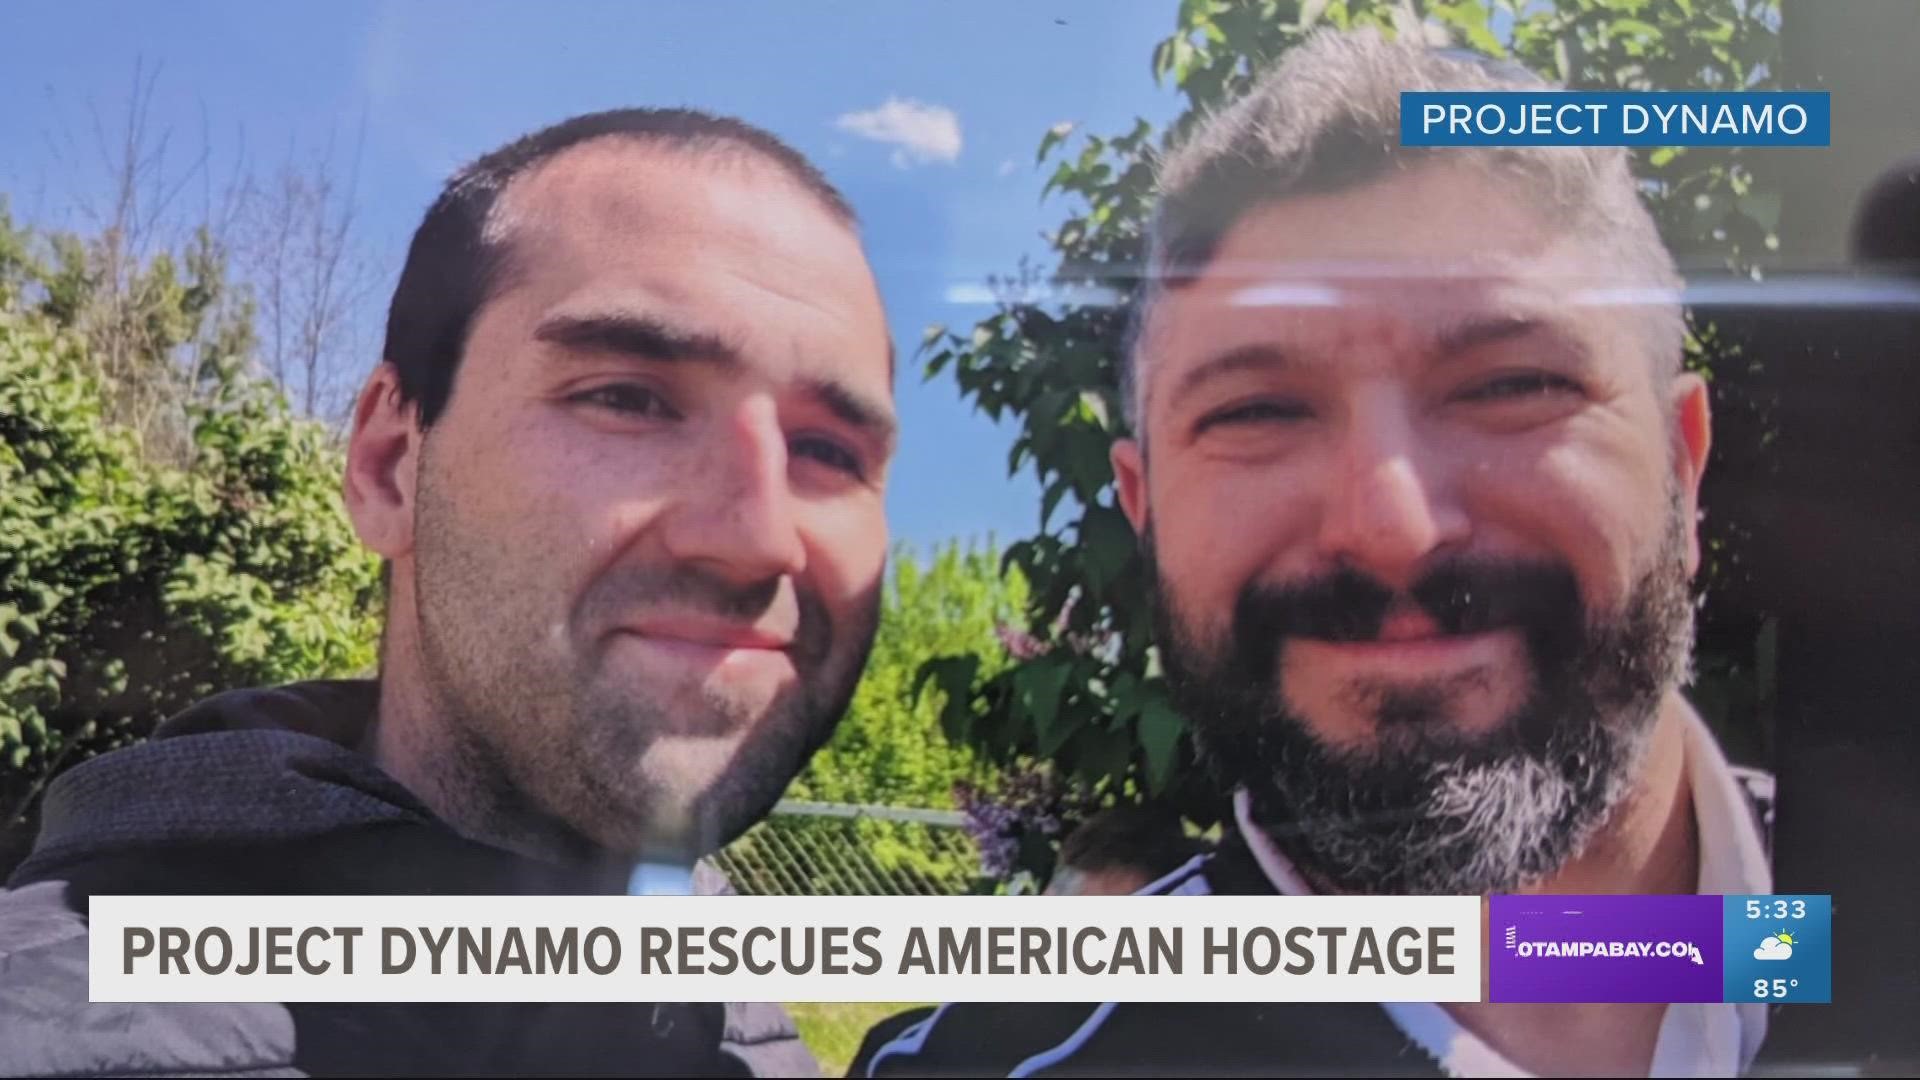 He was reunited with his family after being held captive by Russian forces in Ukraine.